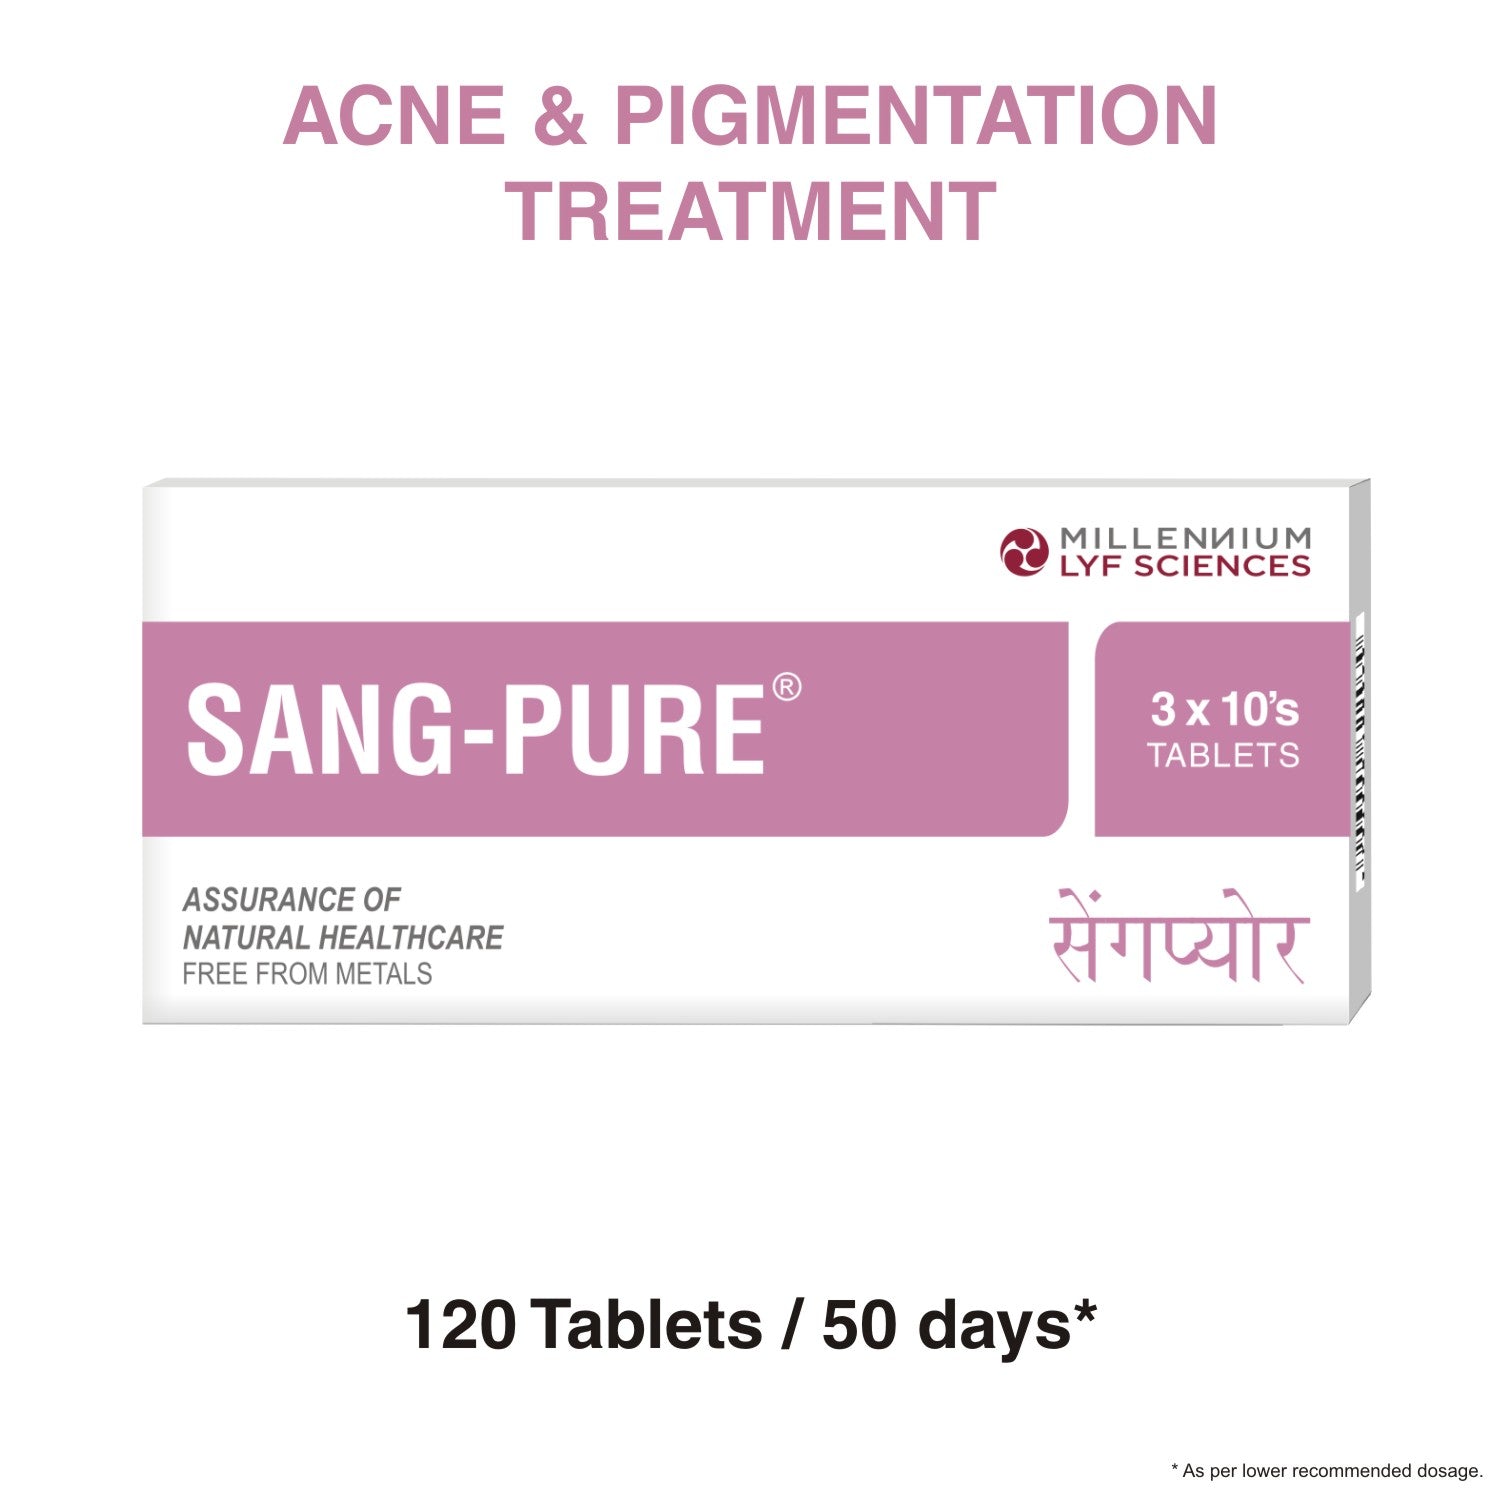 120 tablets can be consumed in 50 days